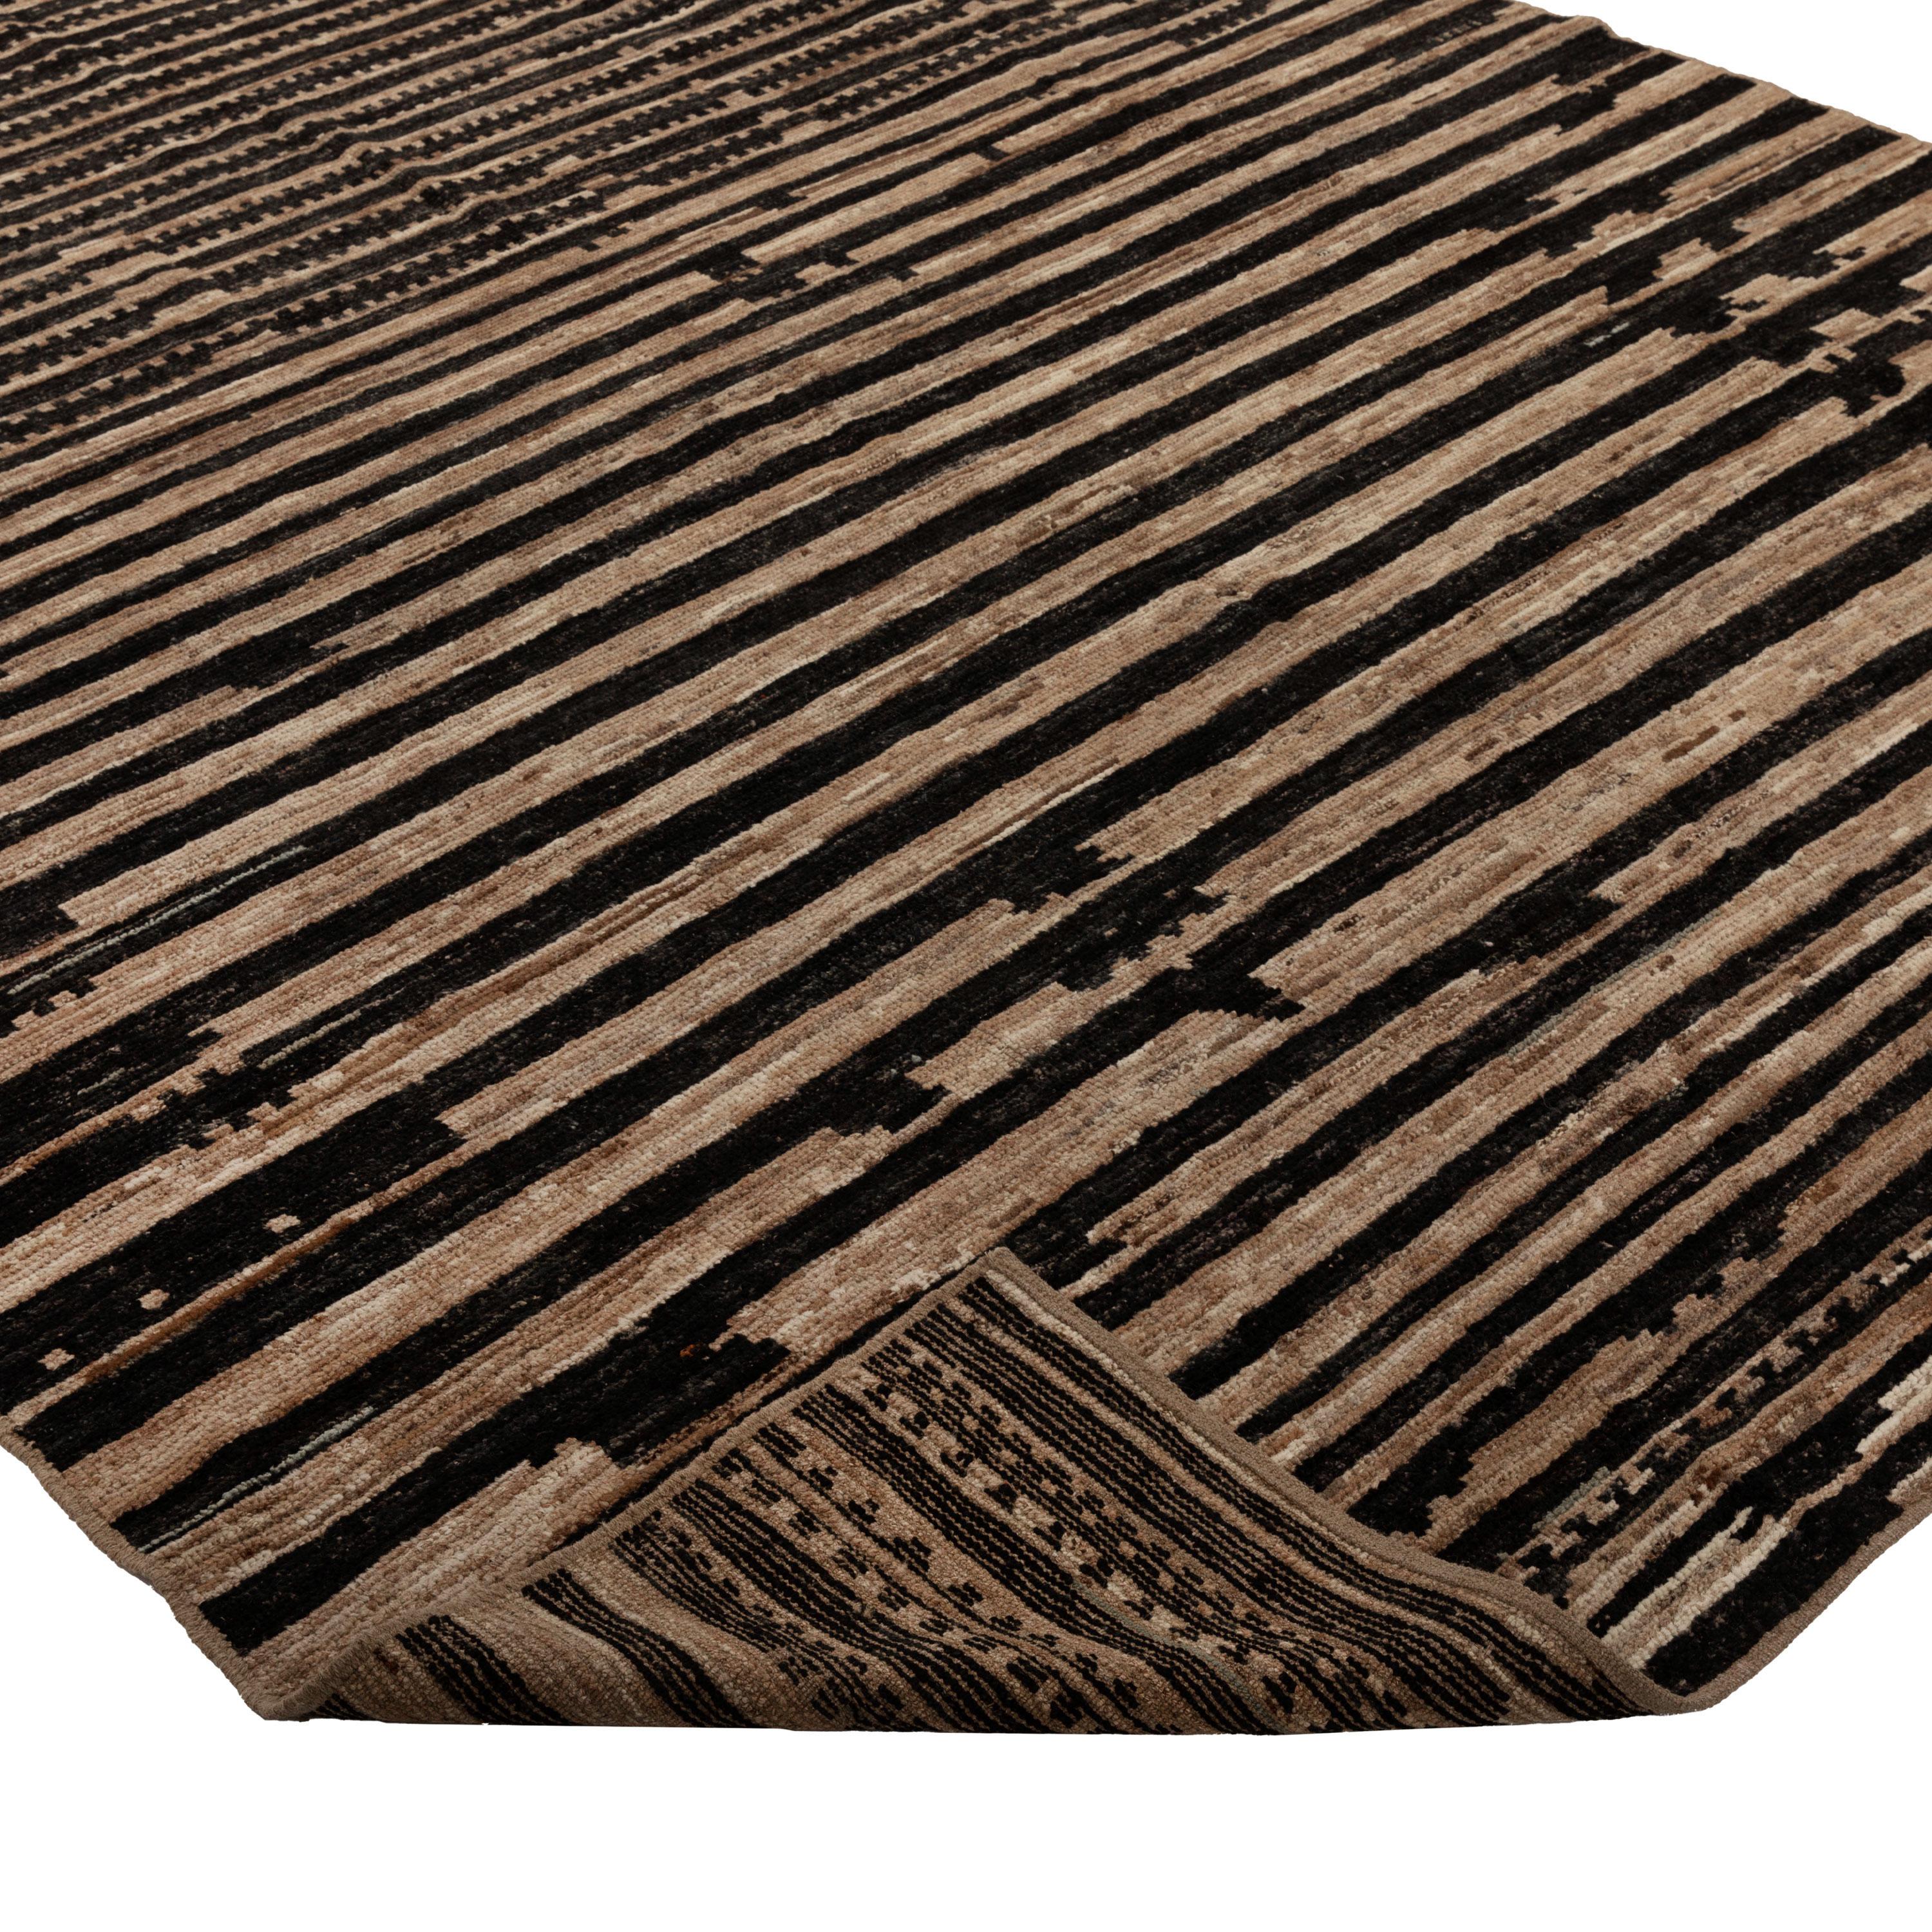 Hand-Knotted abc carpet Zameen Black and Brown Striped Modern Wool Rug - 7'9